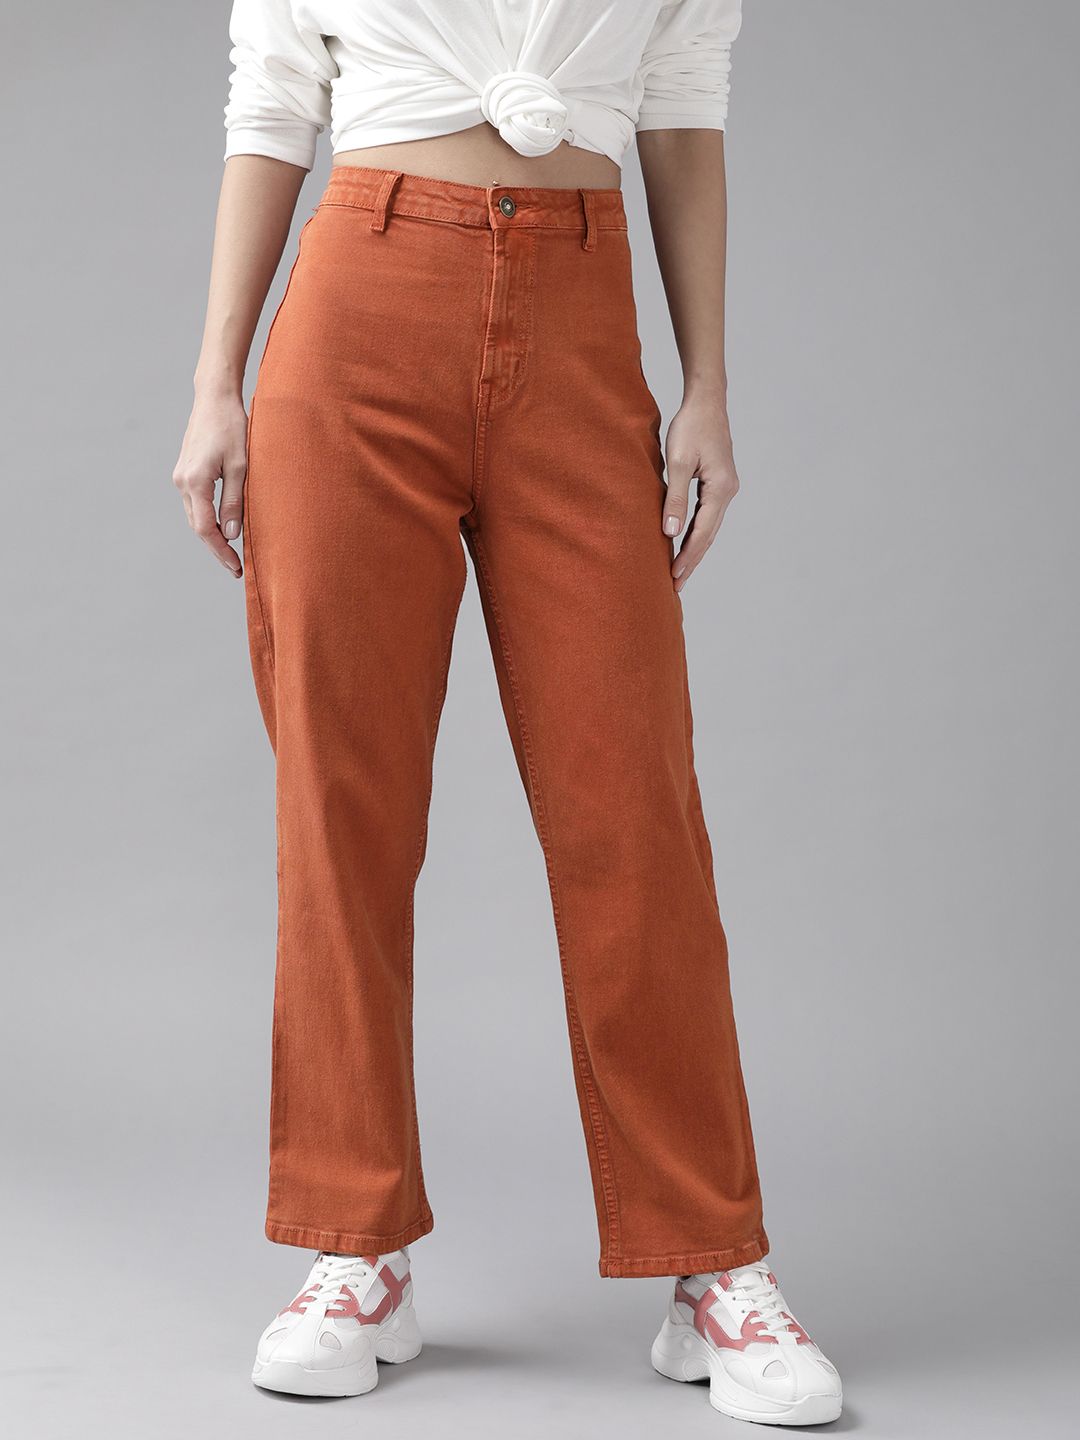 Roadster Women Rust Orange Straight Fit Stretchable Jeans Price in India